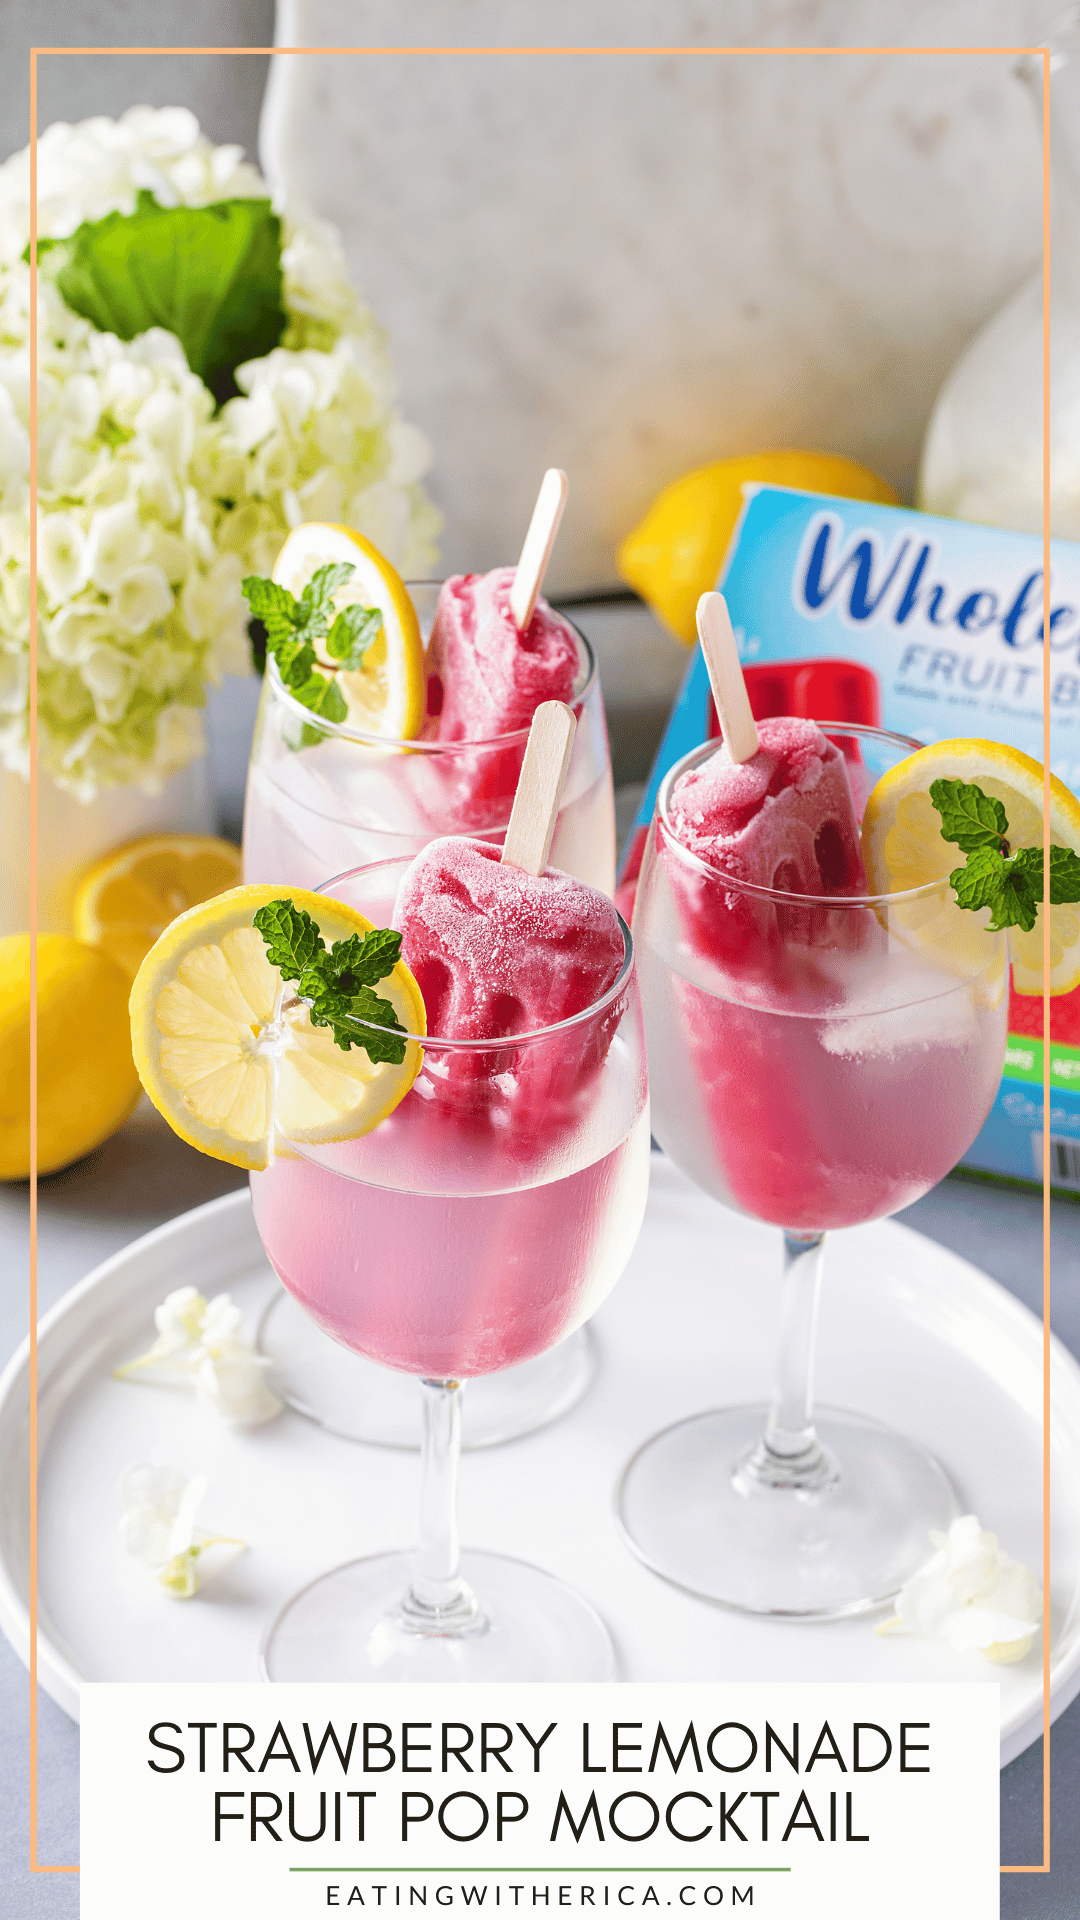 Looking for the perfect mocktail? This Strawberry Lemonade Fruit Pop Mocktail is pure perfection. CLICK HERE to make it ASAP! 